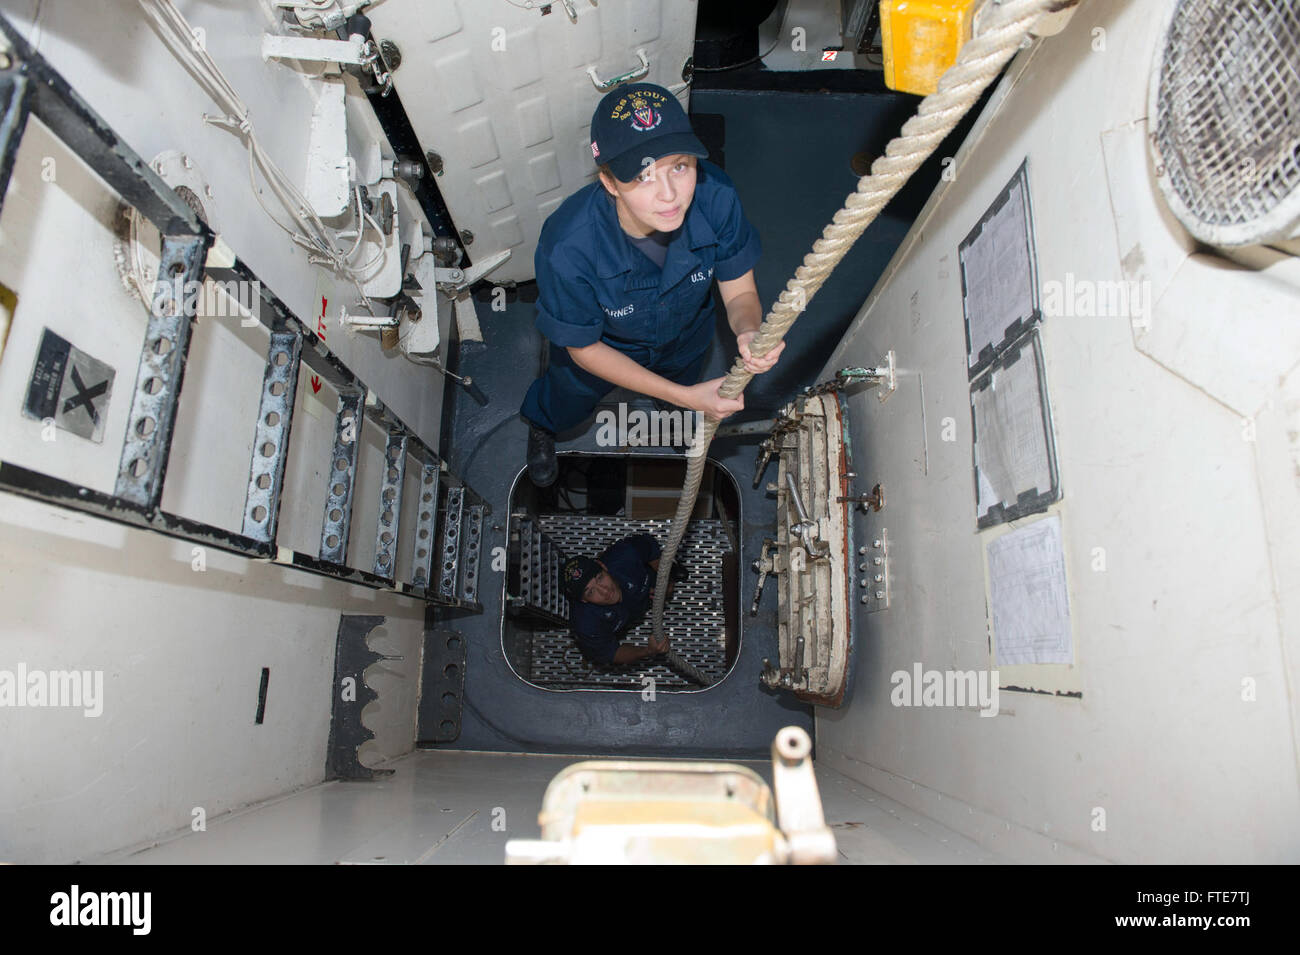 131116-N-UD469-316: AKSAZ, Turkey (Nov. 16, 2013) - Gunner's Mate Seaman Amber Barnes, top, and Fire Controlman 3rd Class Lance Simon send mooring lines below deck aboard the Arleigh Burke-class guided-missile destroyer USS Stout (DDG 55) as the ship departs Aksaz Naval Base. Stout, homeported in Norfolk, Va., is on a scheduled deployment supporting maritime security operations and theater security cooperation efforts in the U.S. 6th Fleet area of operation. (U.S. Navy photo by Mass Communication Specialist 2nd Class Amanda R. Gray/Released) Stock Photo